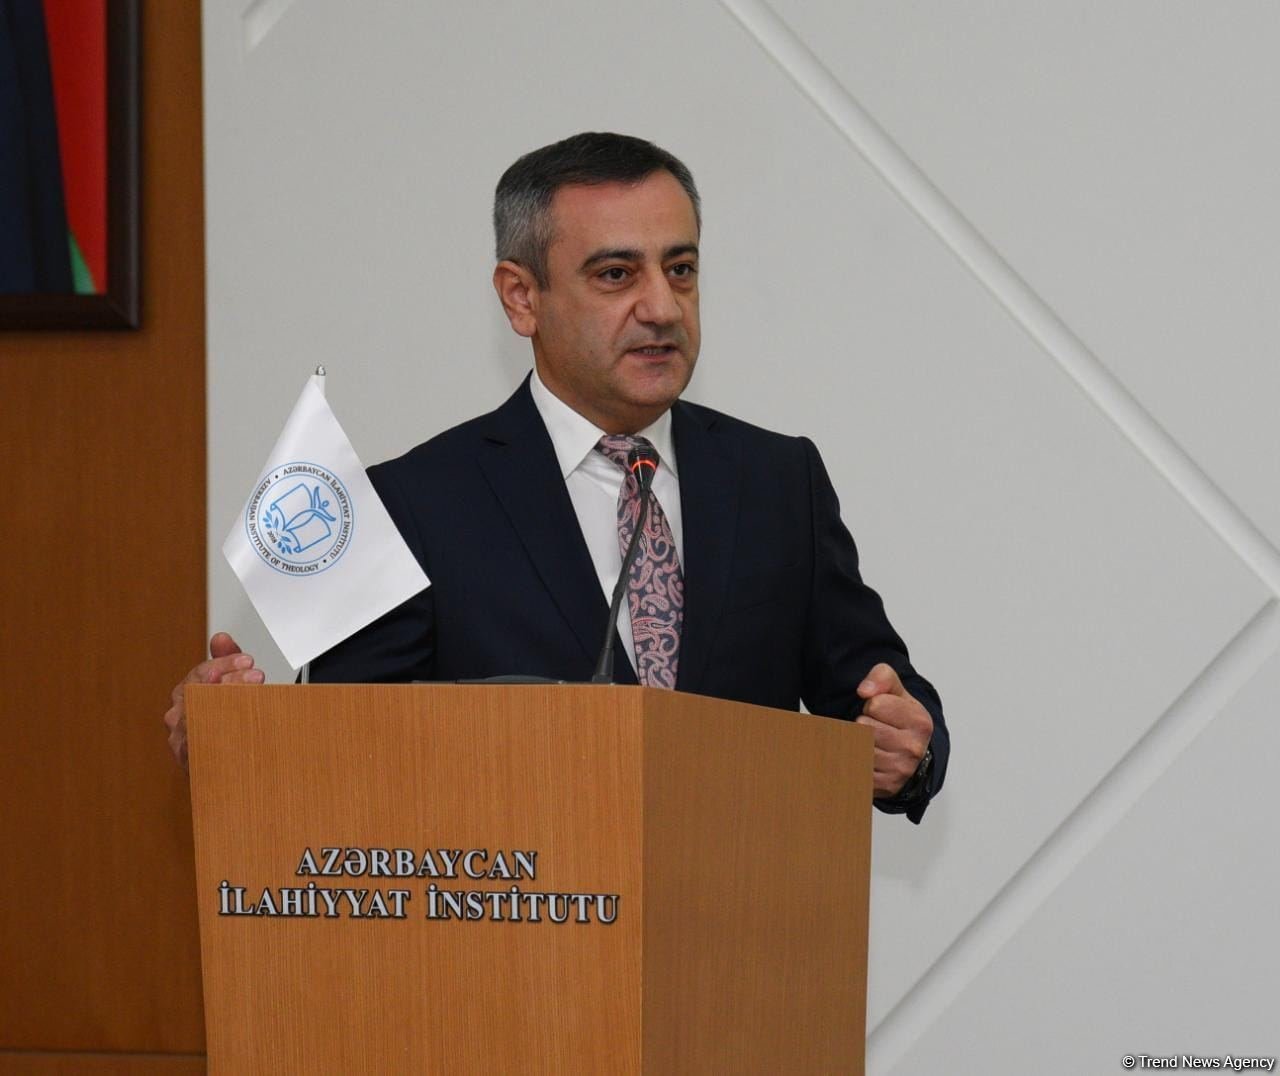 Azerbaijan's media sector aims for new level through ongoing progress - Trend deputy director general